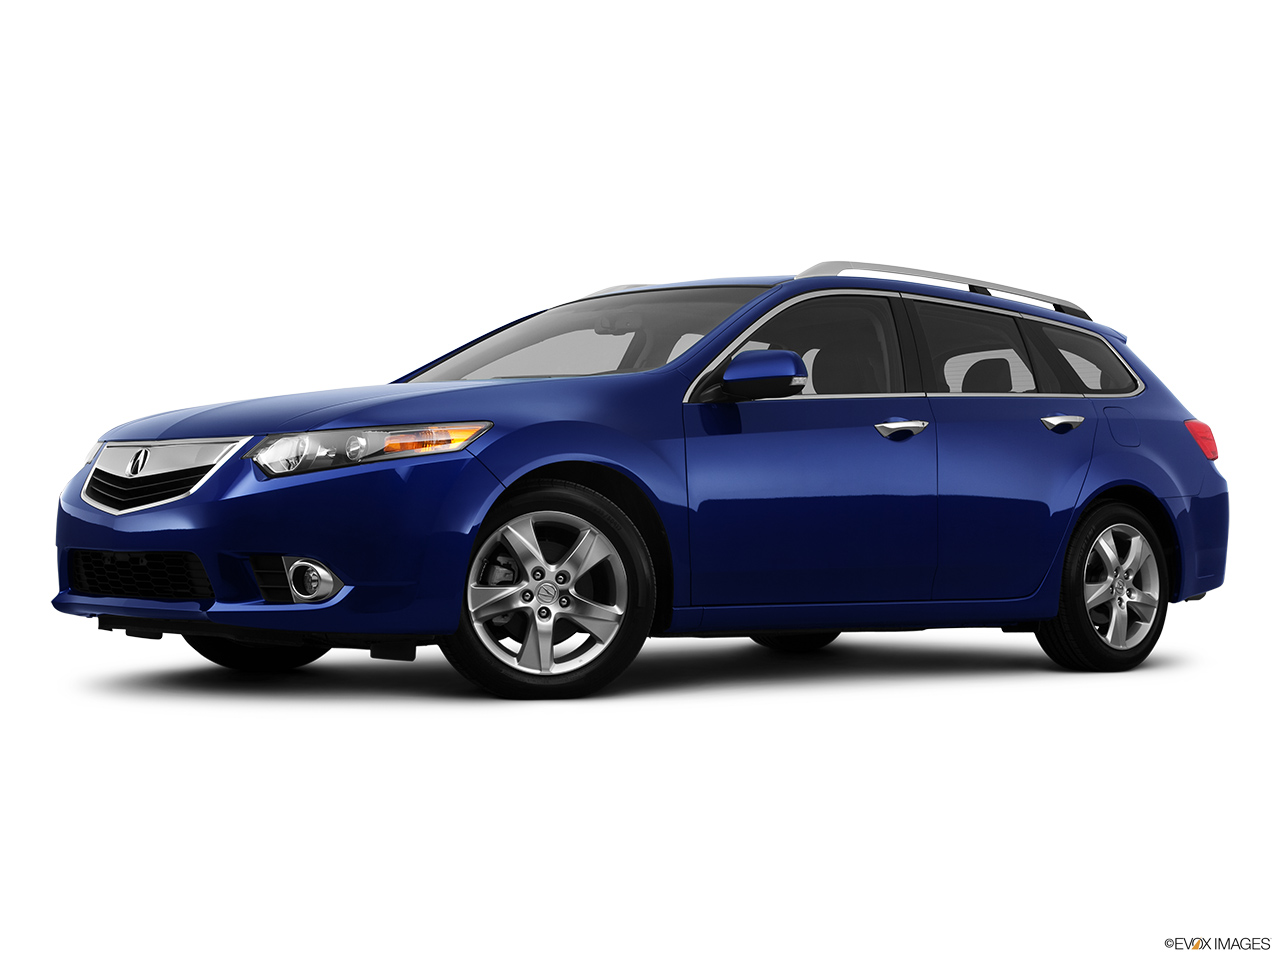 2011 Acura TSX Sport Wagon Low/wide front 5/8. 